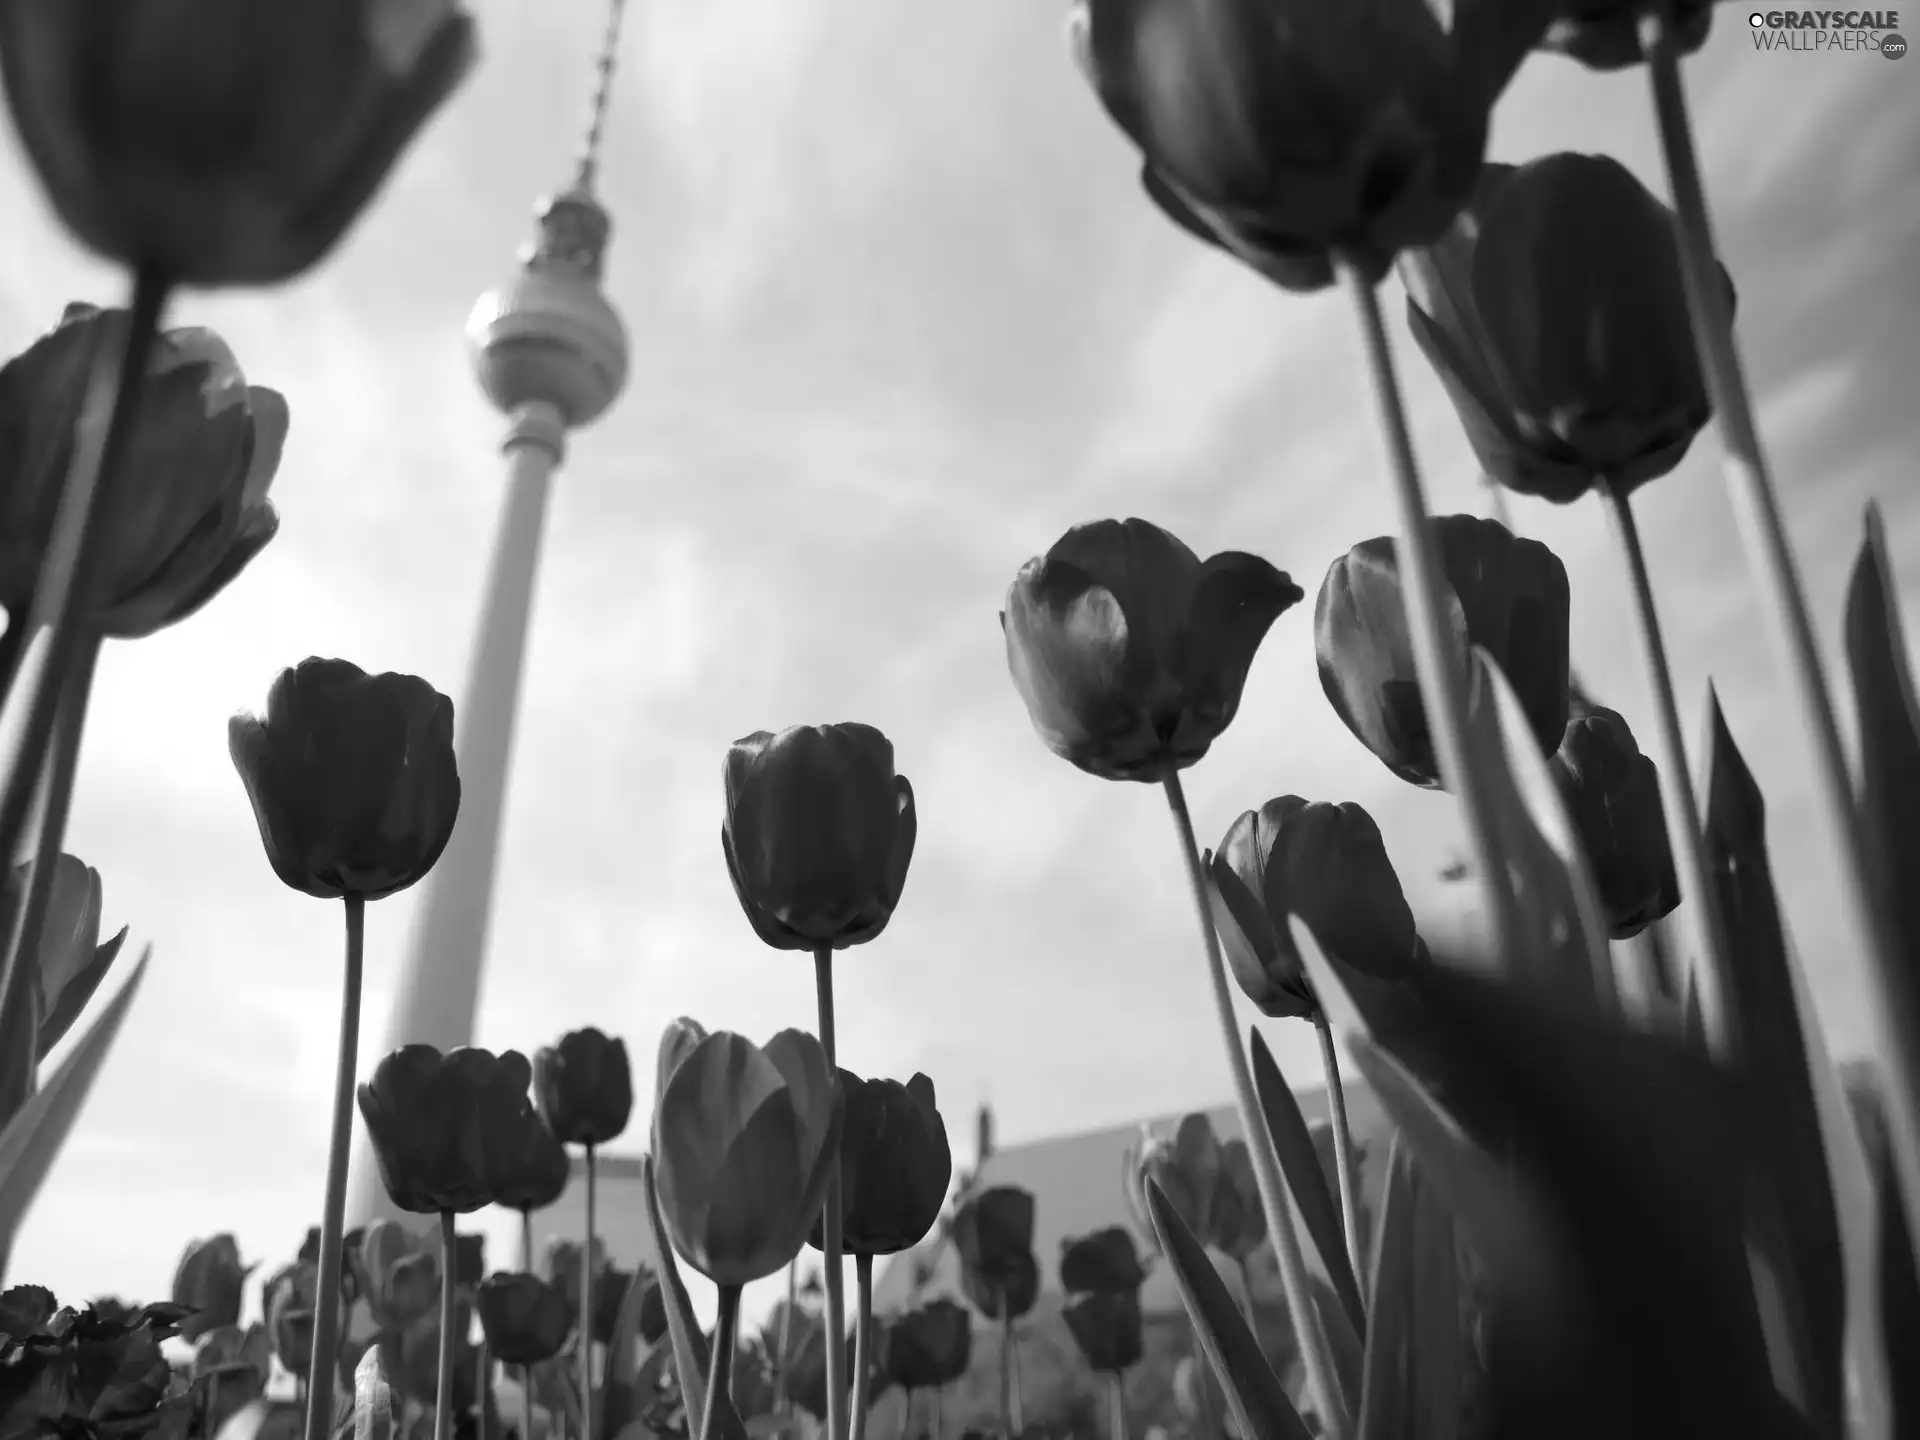 Tulips, Television, Berlin, tower